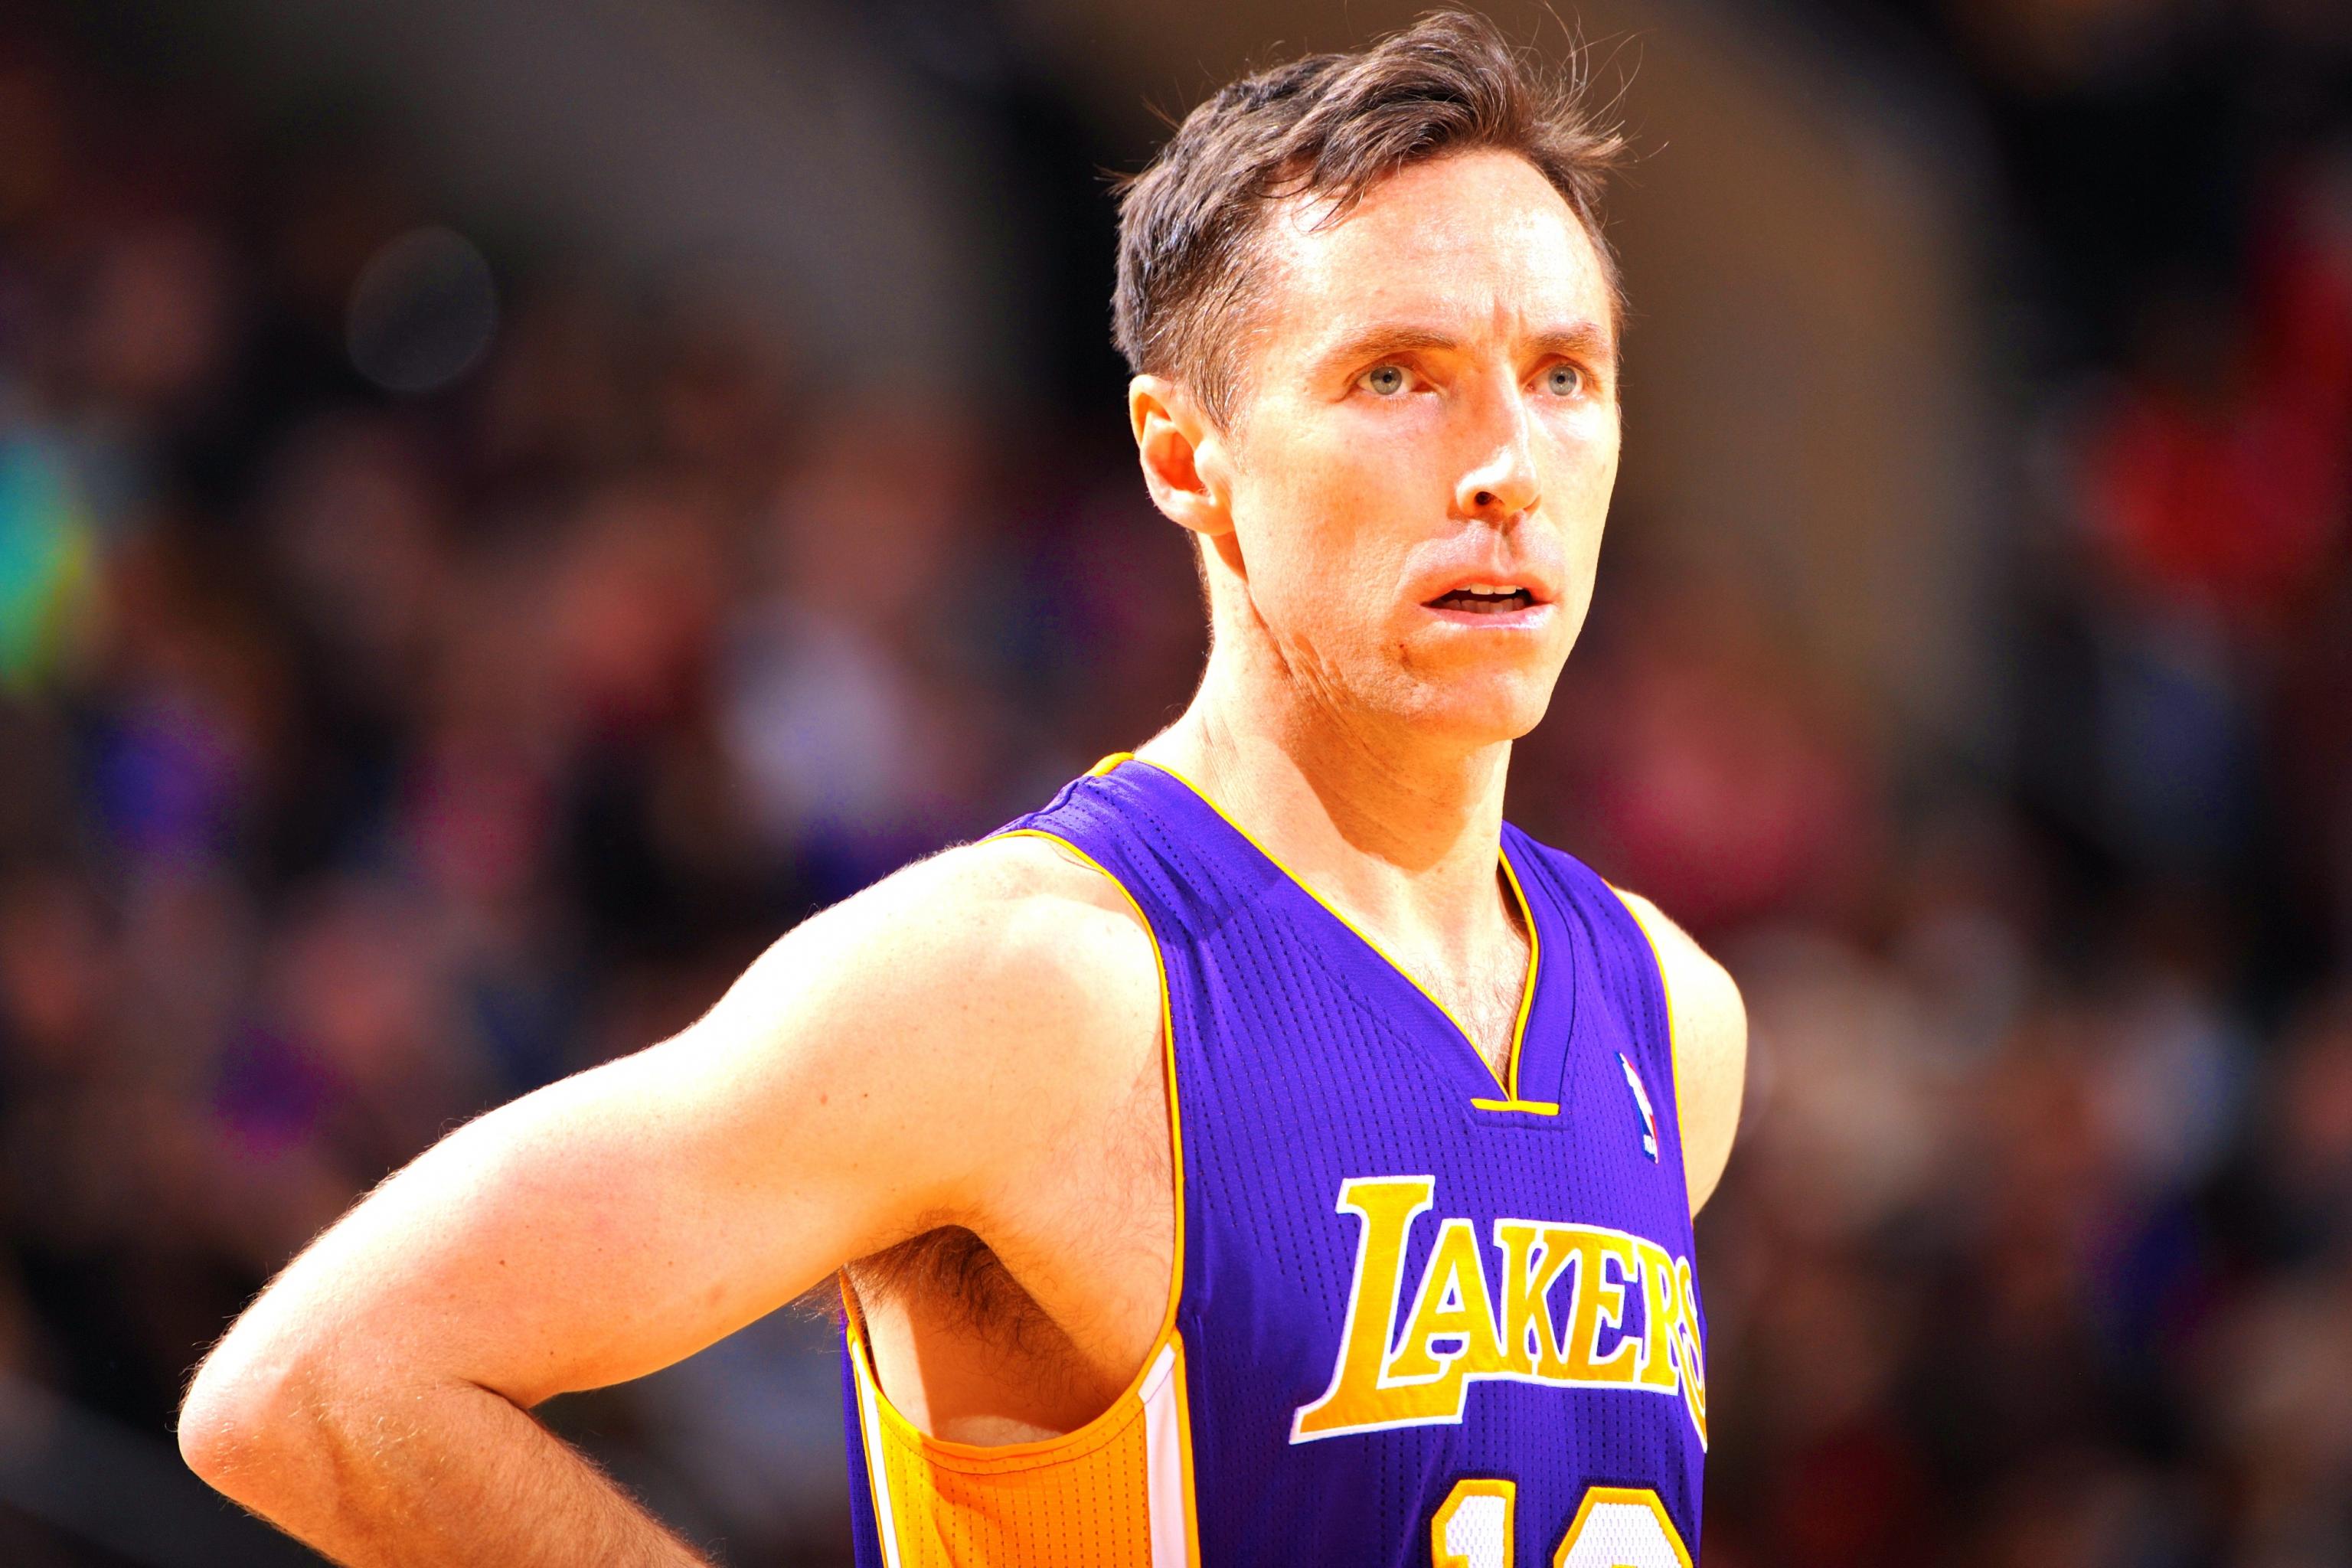 What Steve Nash meant to me is much more than Steve Nash the